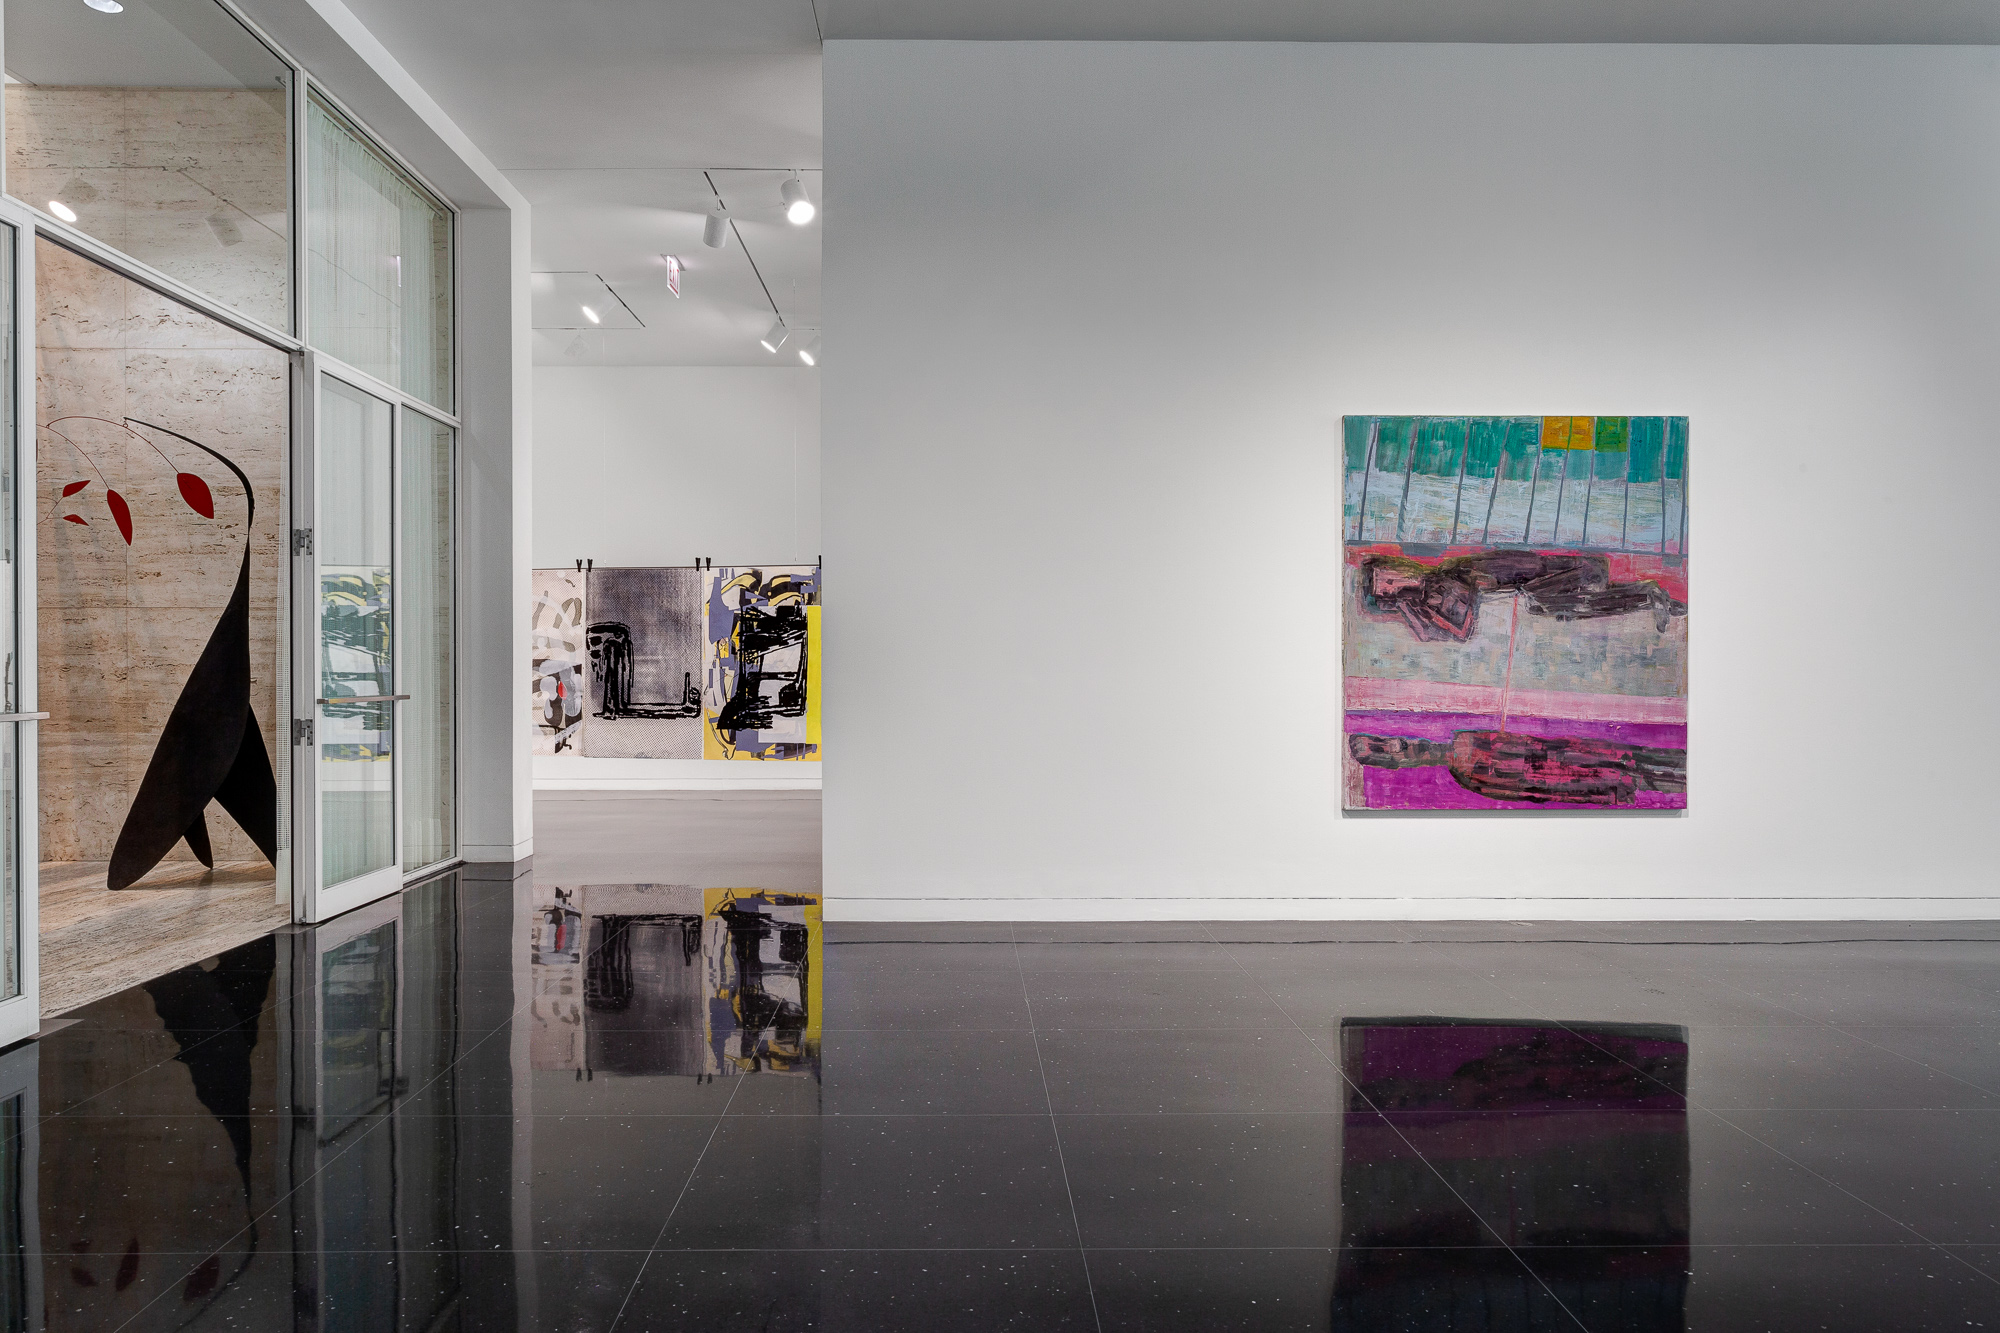 Installation view of The Arts Club's east and west galleries. One large painting is centered on the east gallery wall, and one large painting is installed on the far west gallery wall.